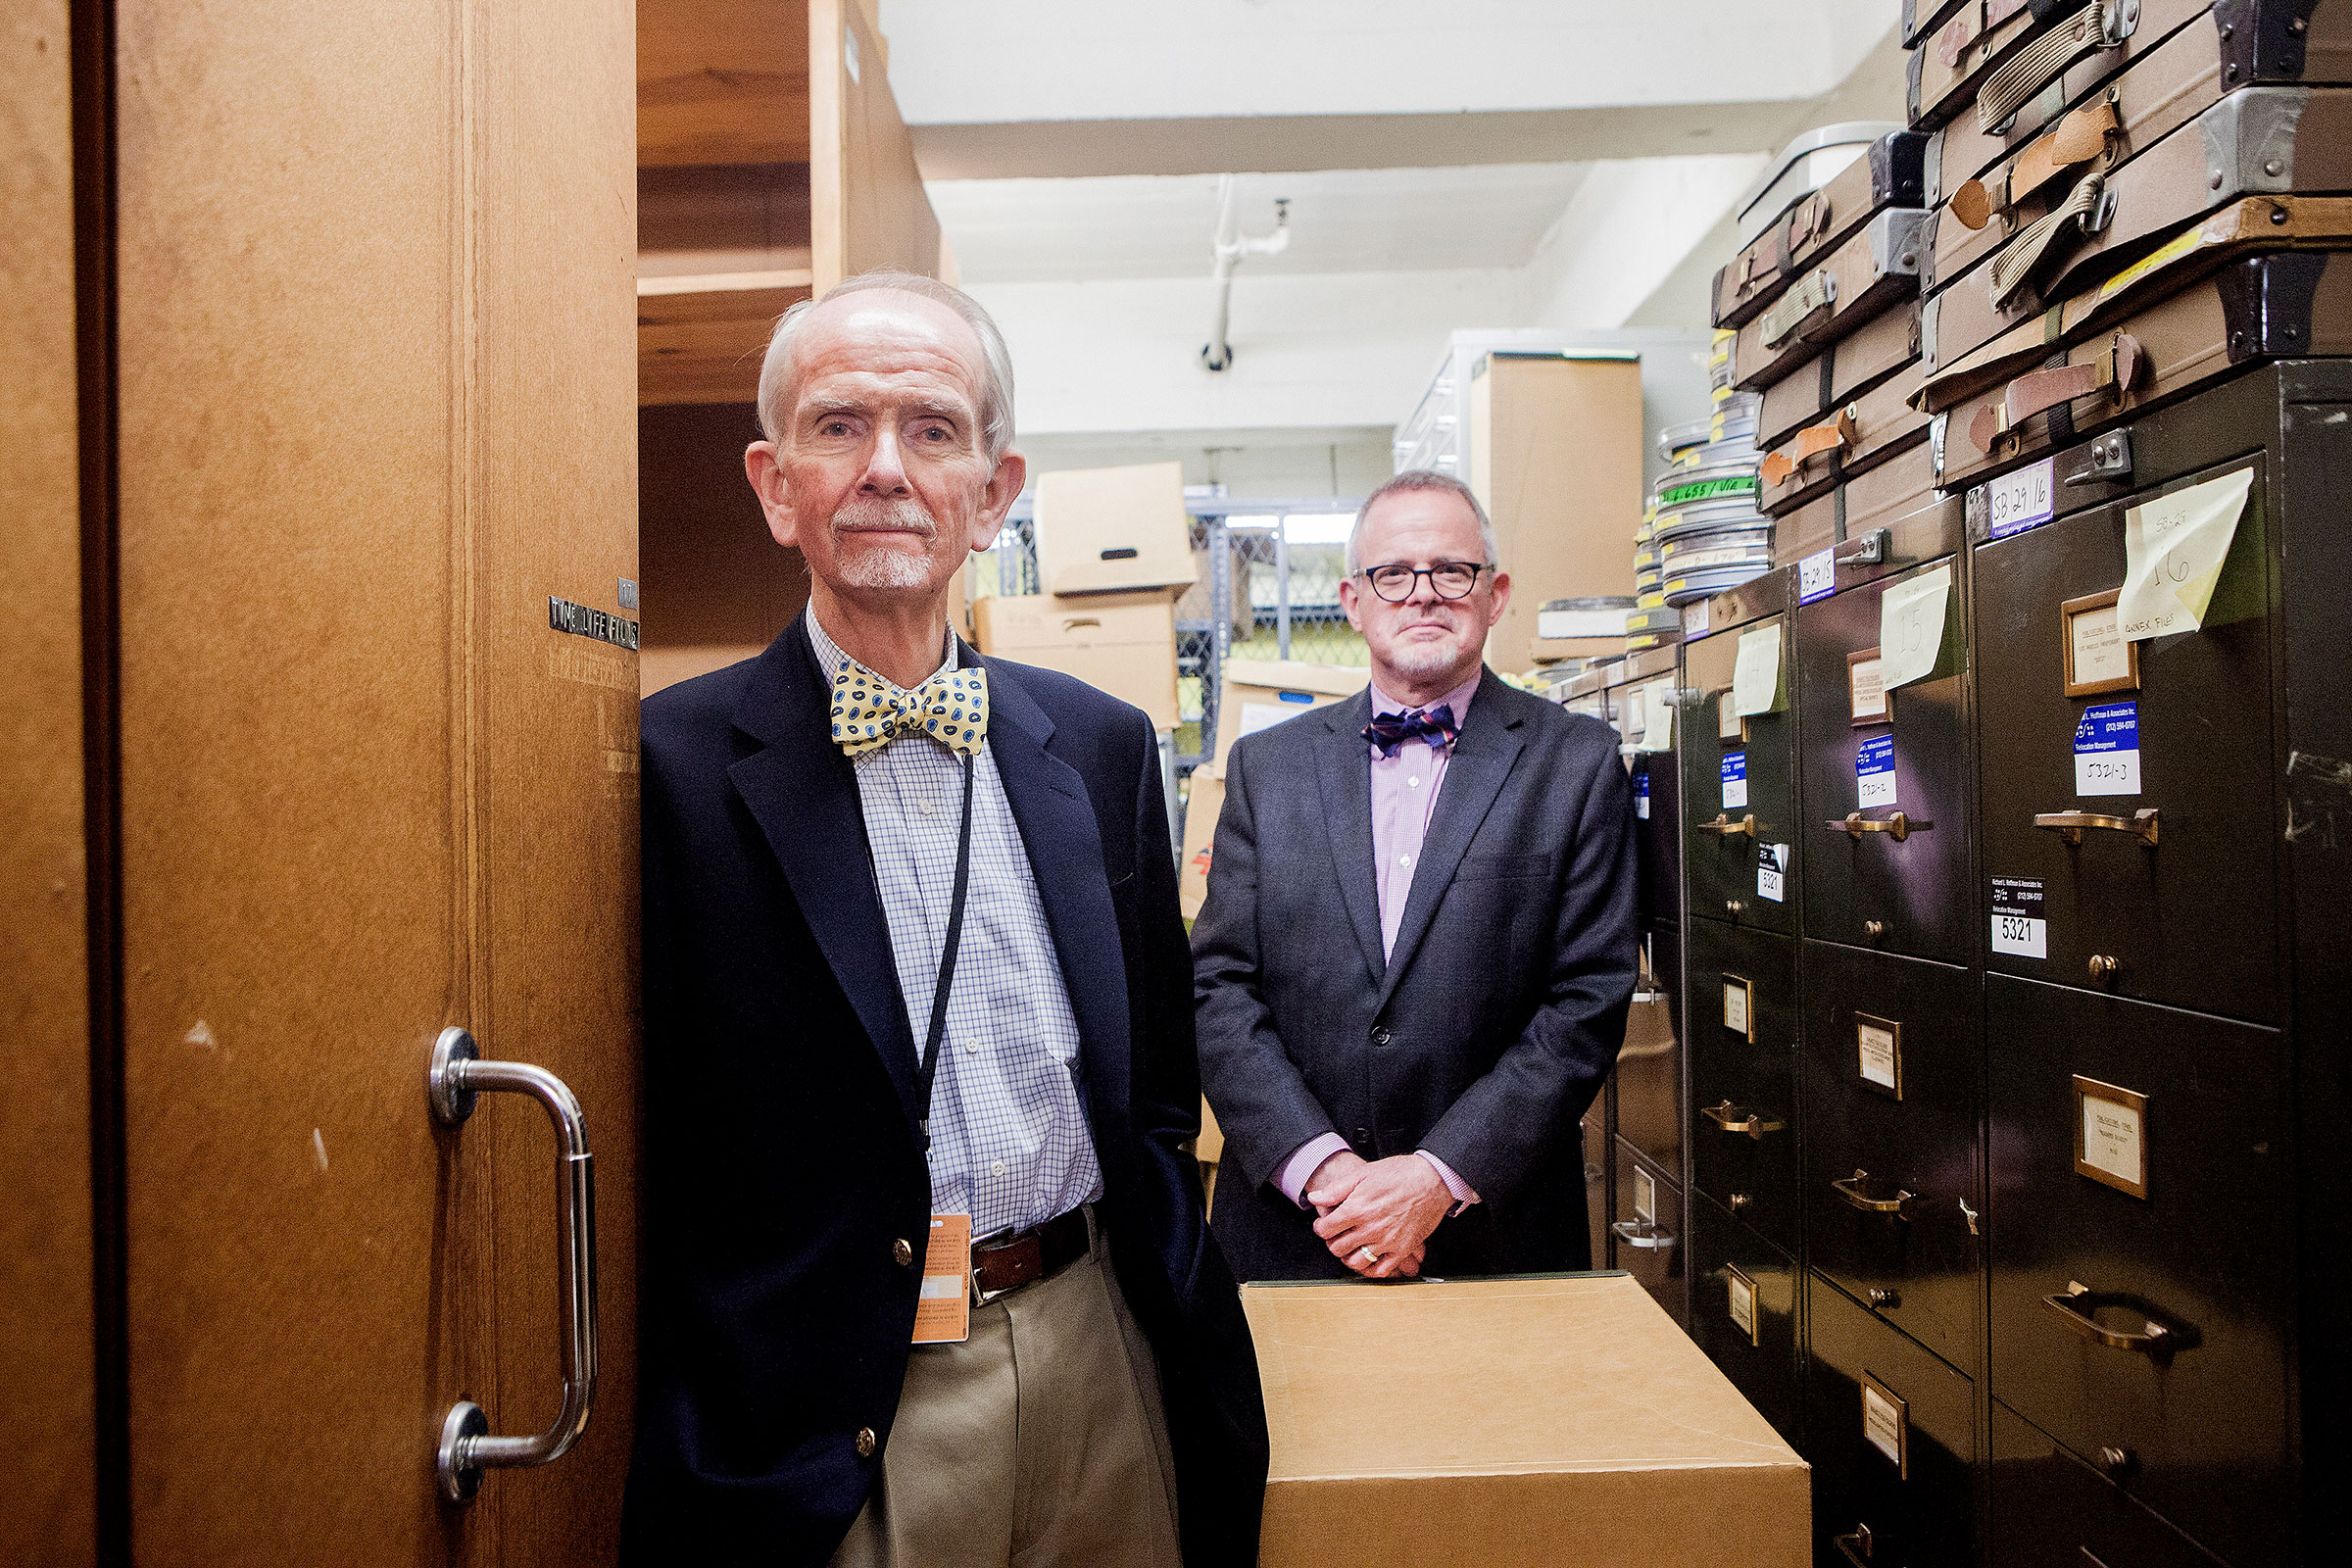 Bill Hooper, the Time Inc. archivist, right, and Michael Ryan, left, the library director of the New-York Historical Society, in the Time-Life archive storage space in New York, Nov. 4, 2015.